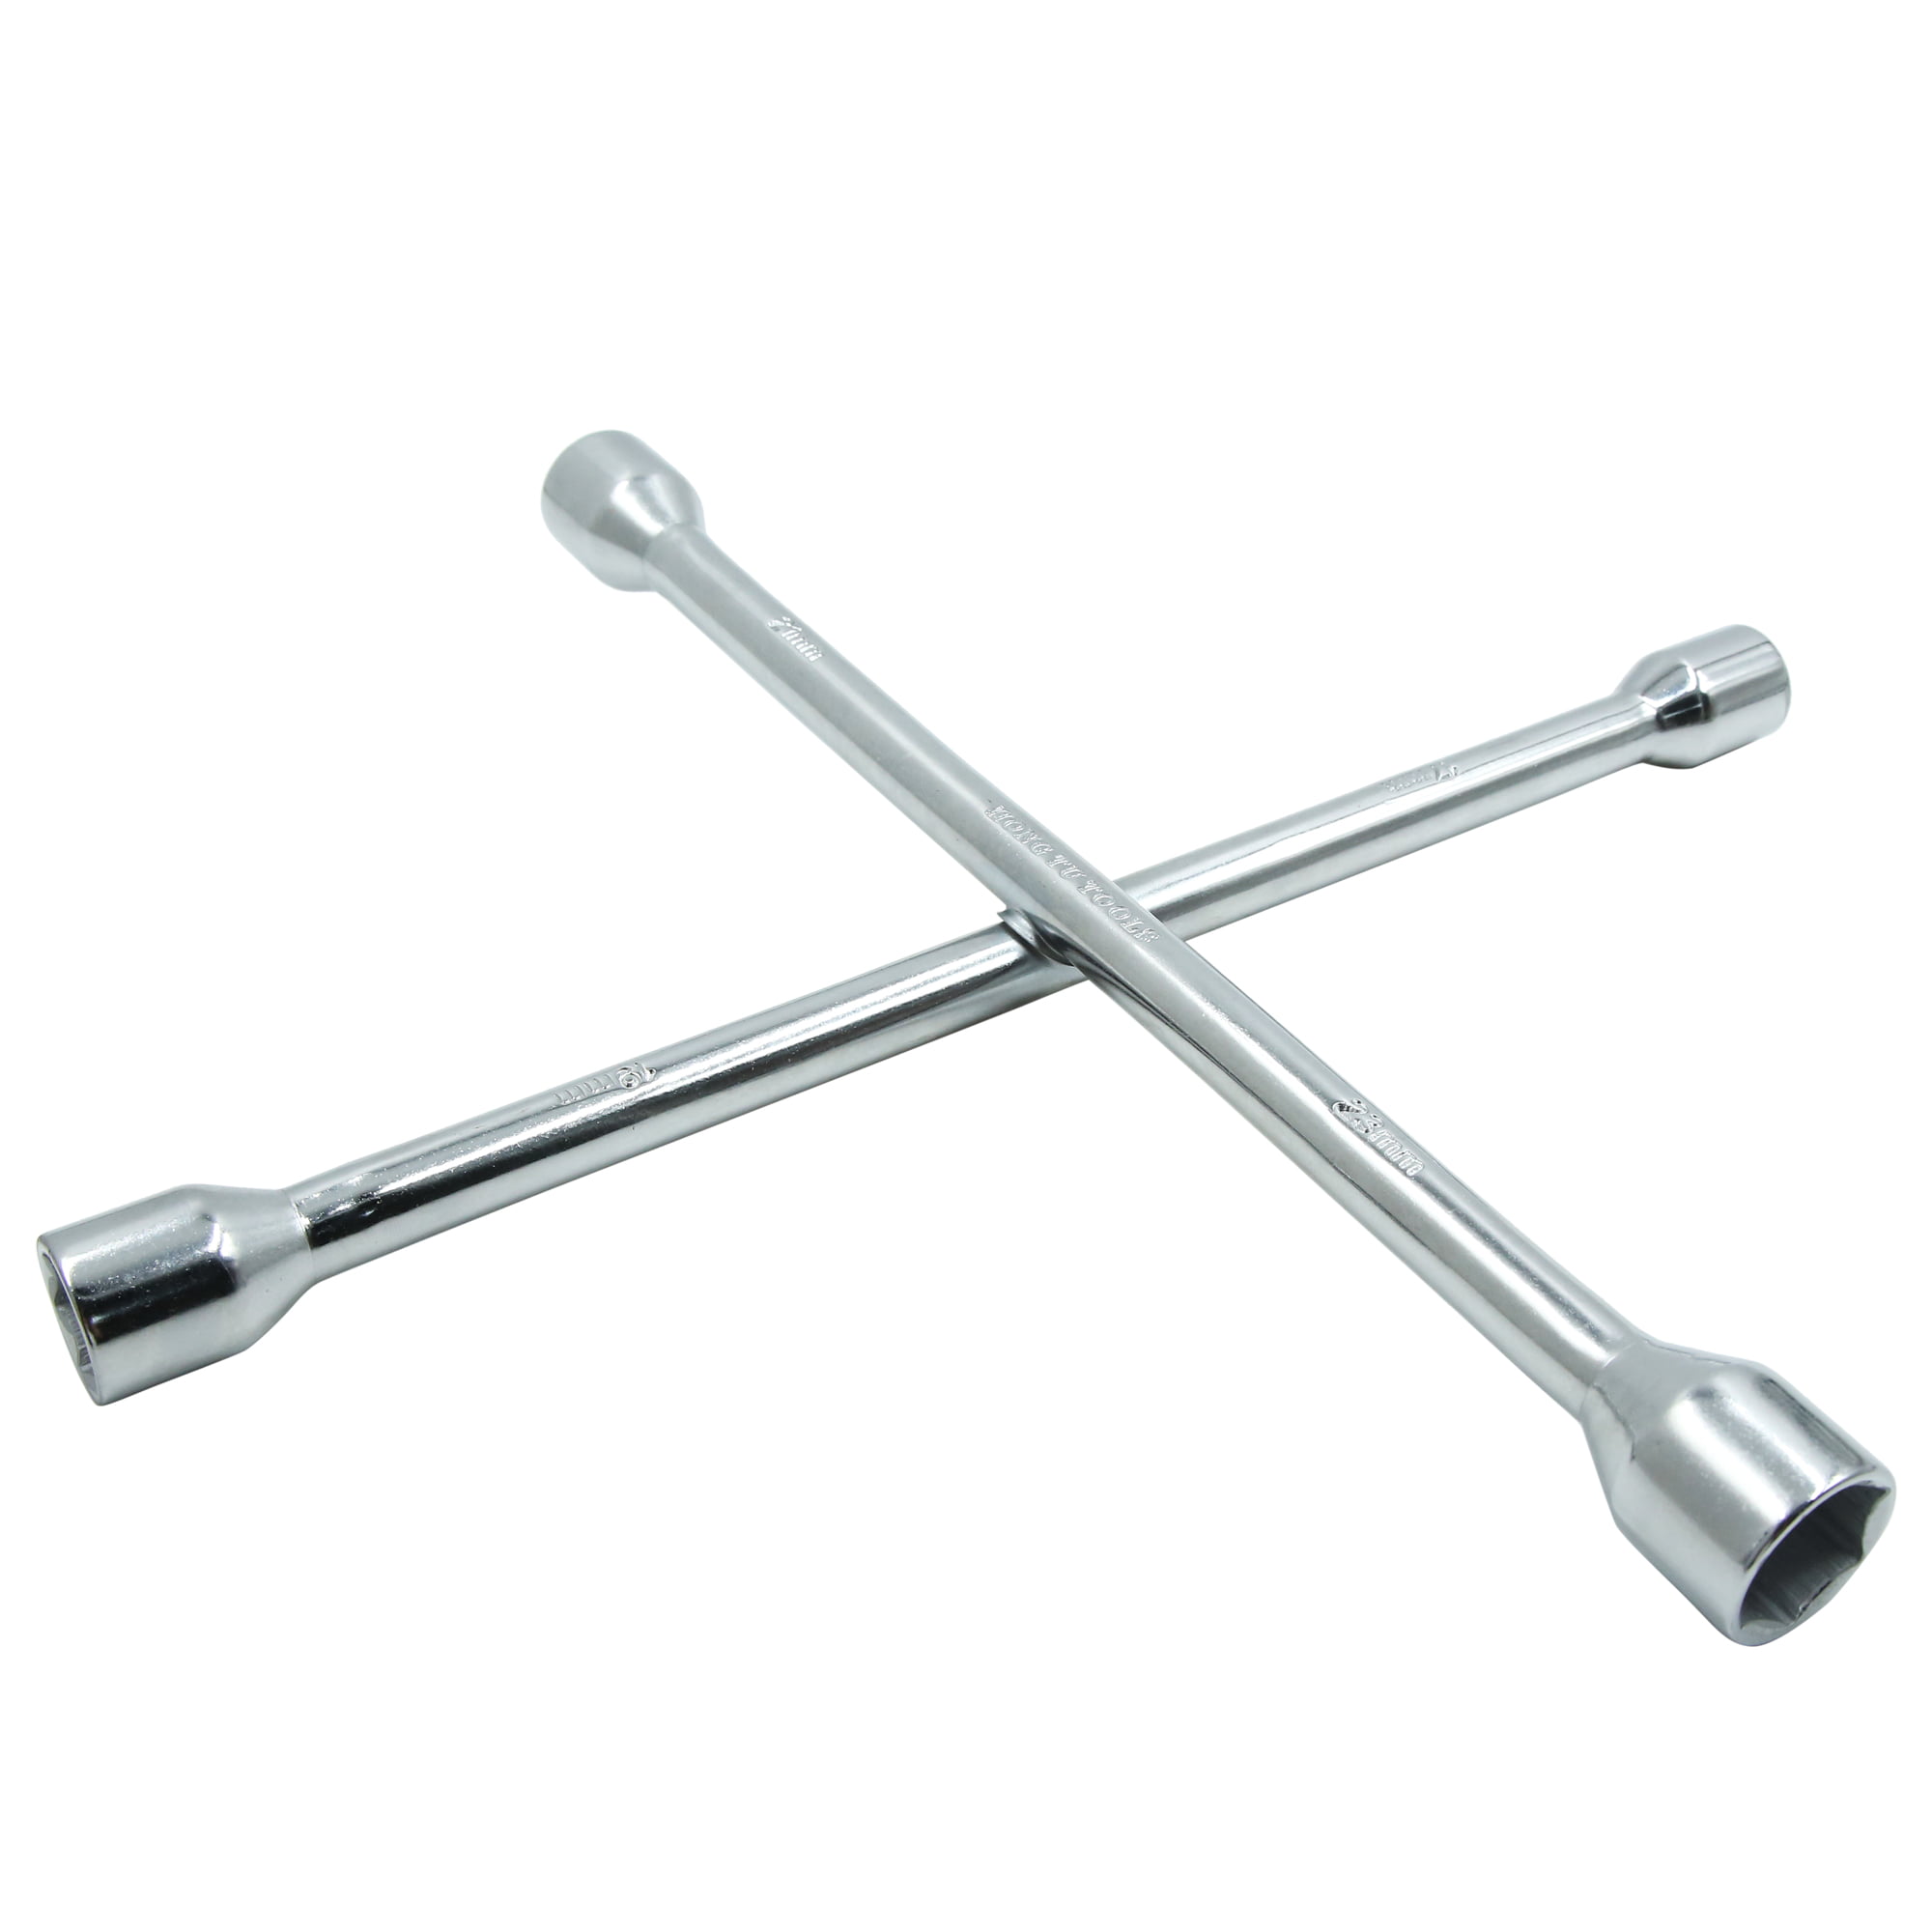 EXXO Tools Universal Lug Wrench - Heavy Duty 4 Way Lug Wrench Crosswrench  Spare Tire Iron Wheel Nut Spanner Car Jack Ratchet Wrench Lug Tool for Car